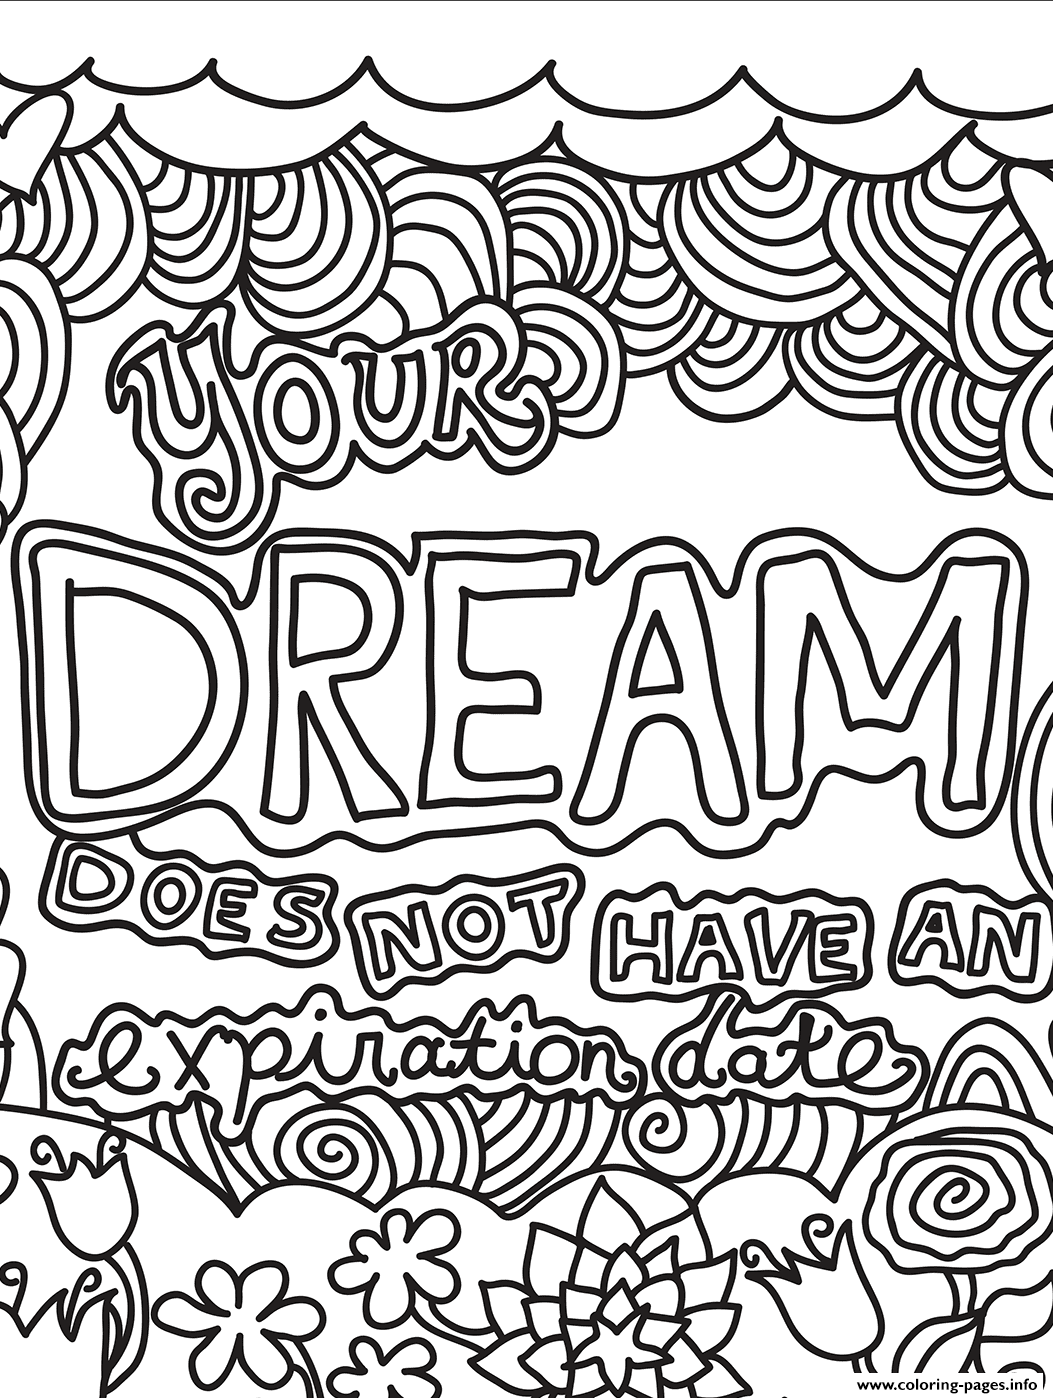 Your Dream Does Not Have An Expiration Date coloring